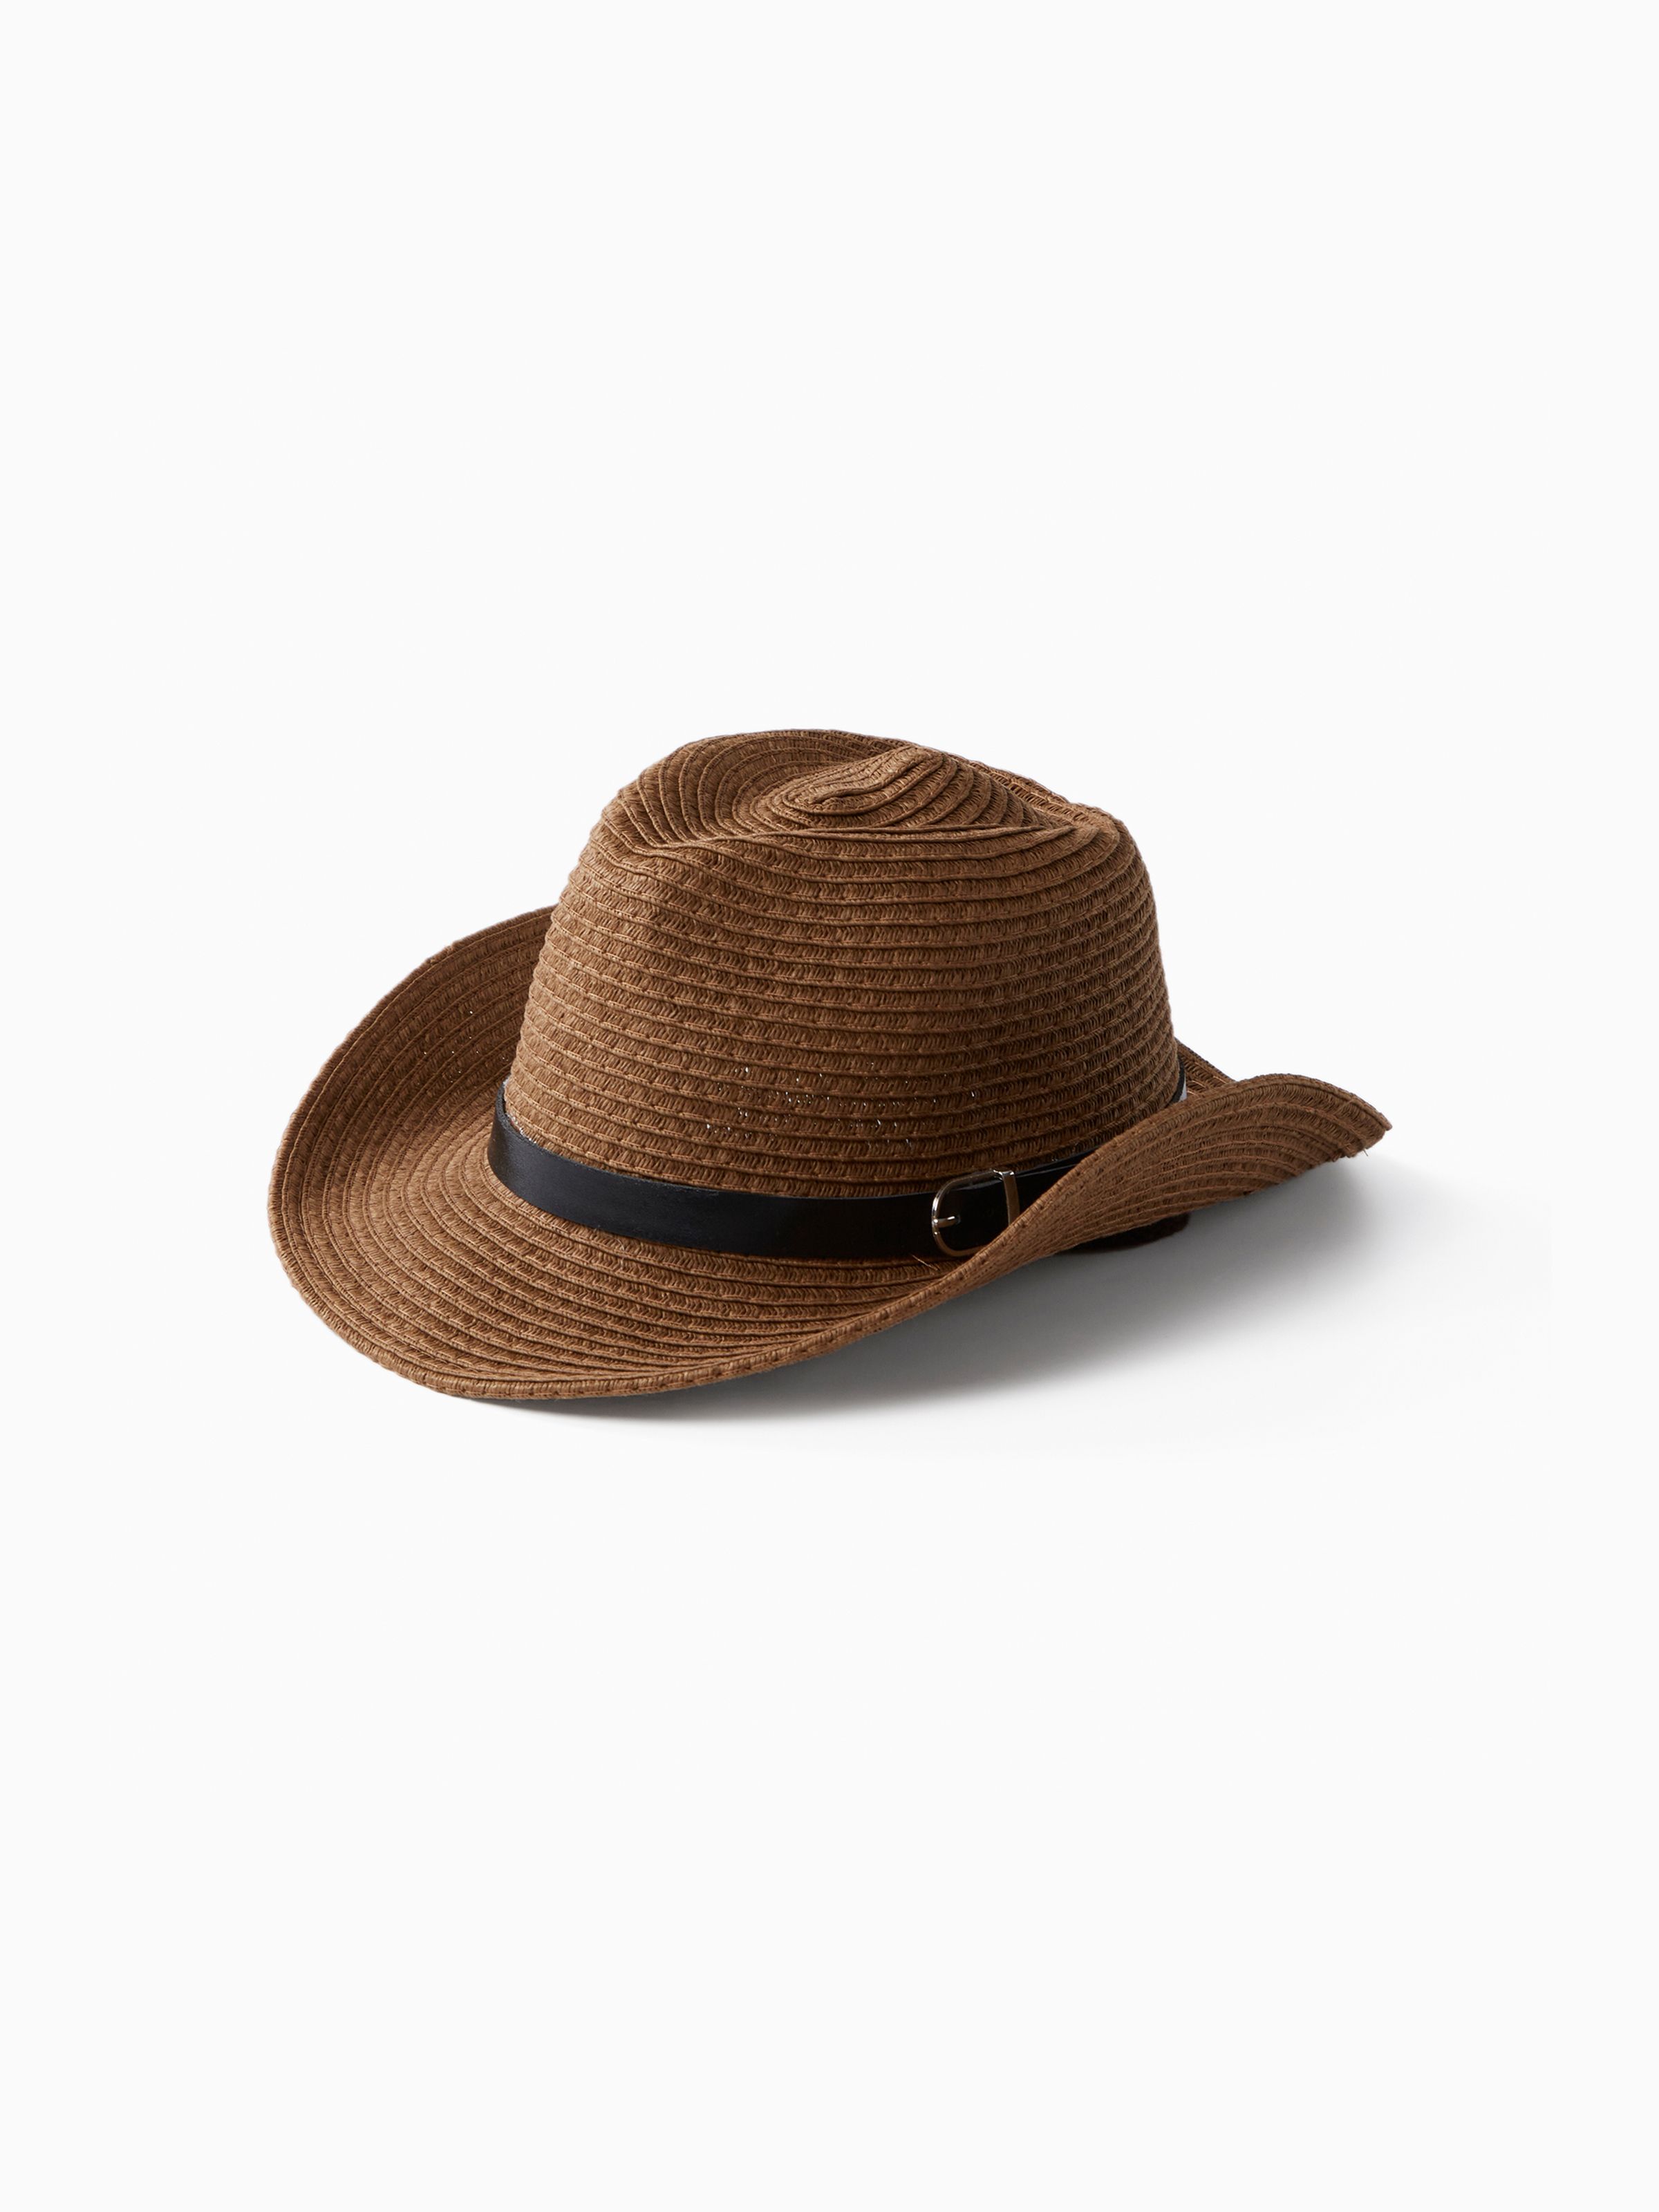 

Daddy and Me Solid color western cowboy straw hat, 100% bamboo pulp fiber material